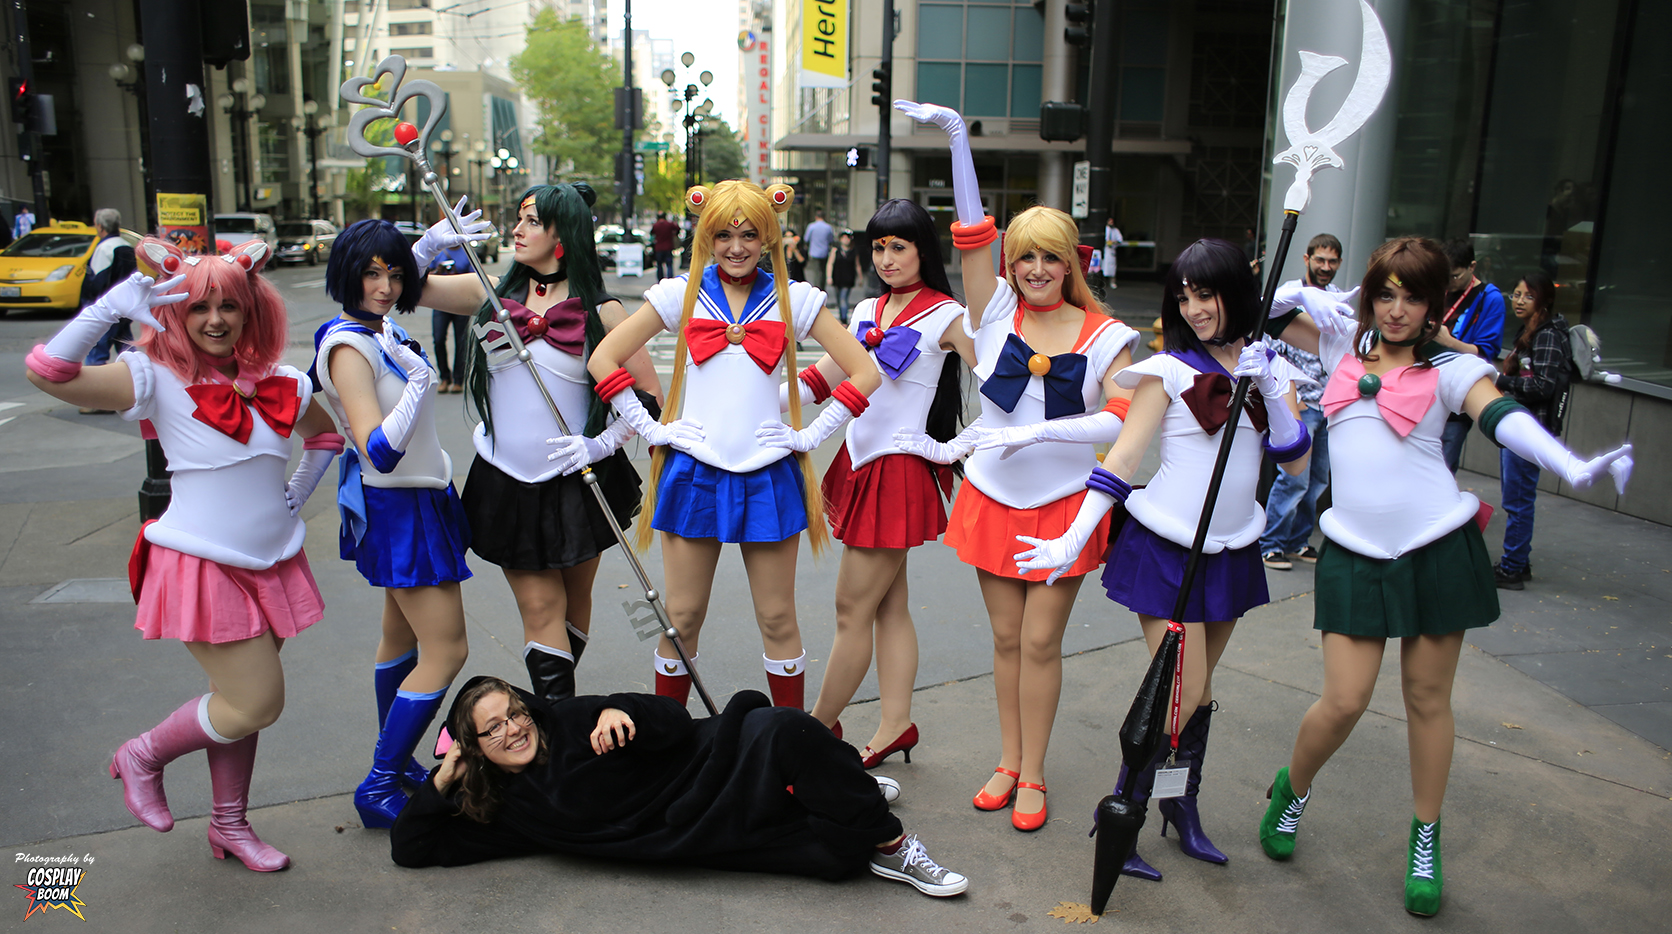 A Look Back At Some Of 2014’s Coolest Cosplay